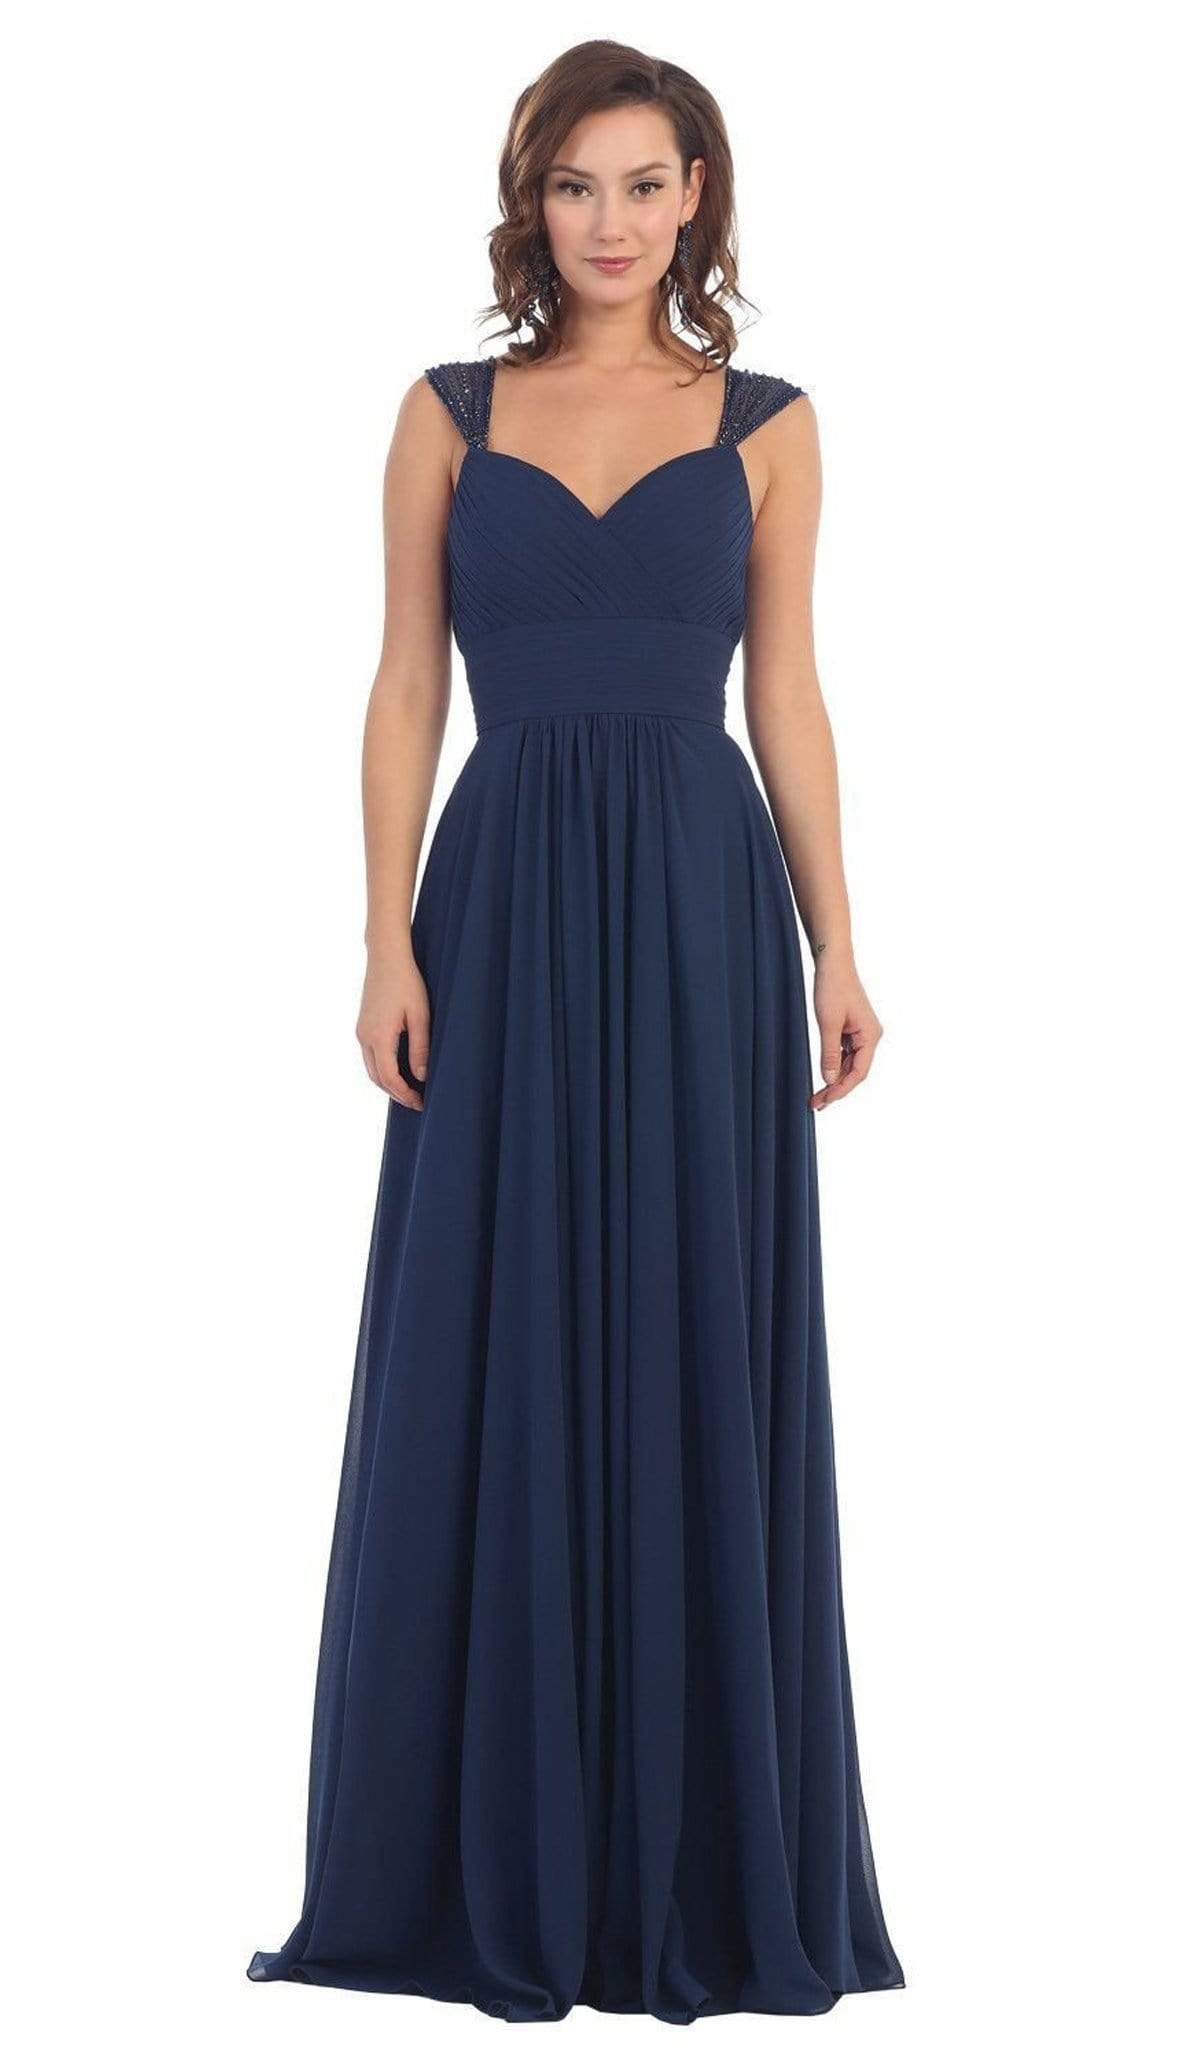 May Queen - MQ1275B Pleated Sweetheart A-line Evening Dress
